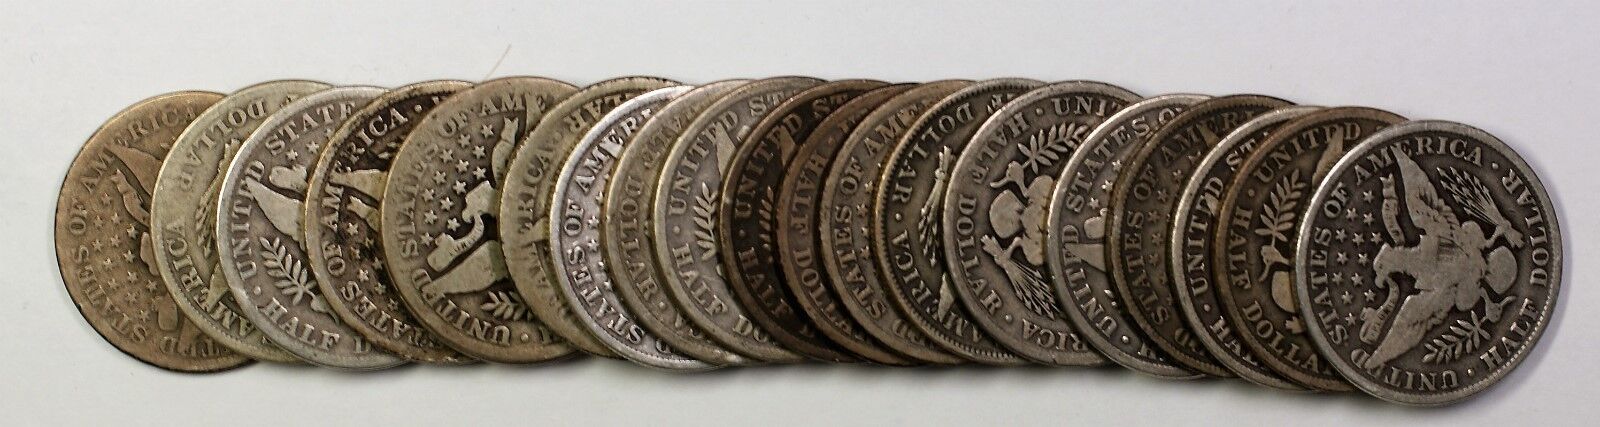 1901 Barber Half Dollar 50c Roll 20 Circulated 90% Old Silver Coins Lot